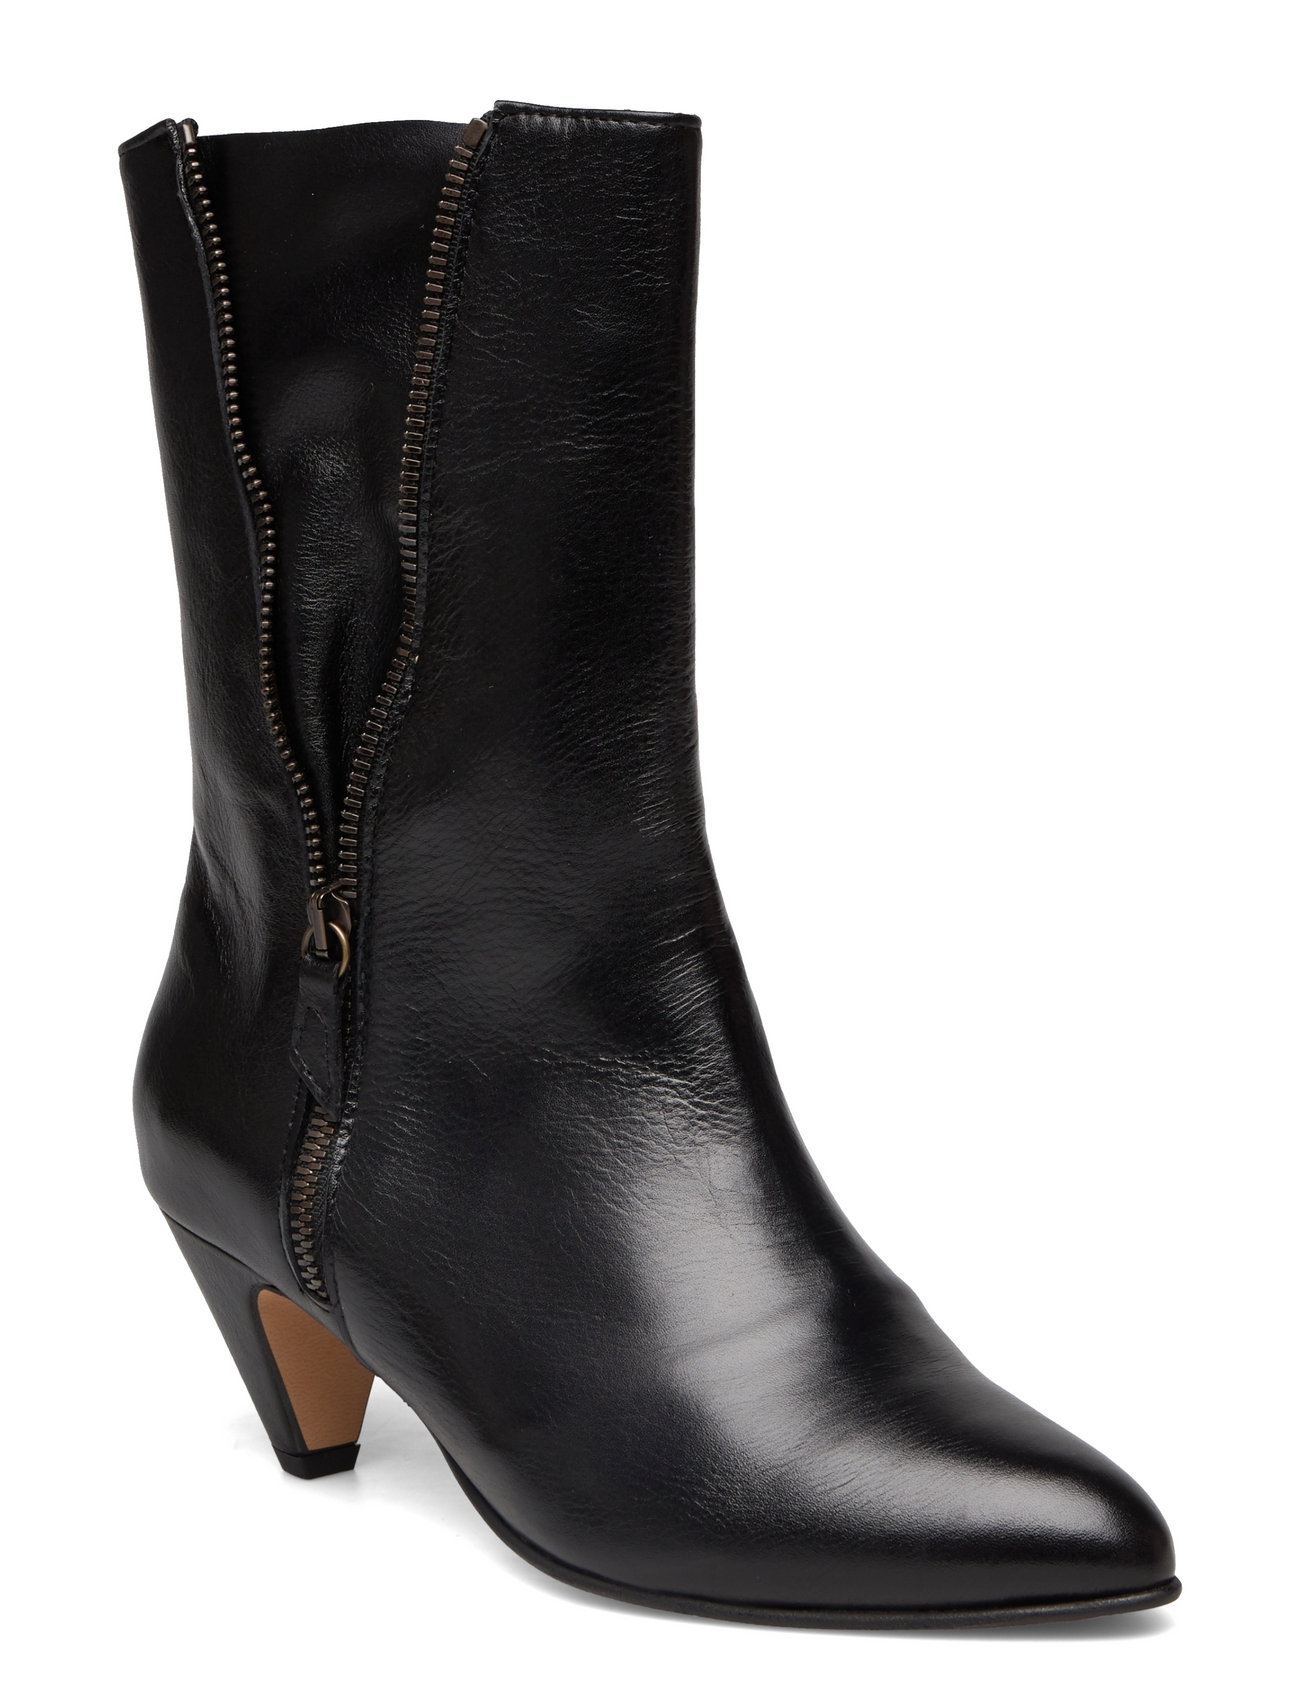 Livianna 50 Stiletto Shoes Boots Ankle Boots Ankle Boots With Heel Black Anonymous Copenhagen